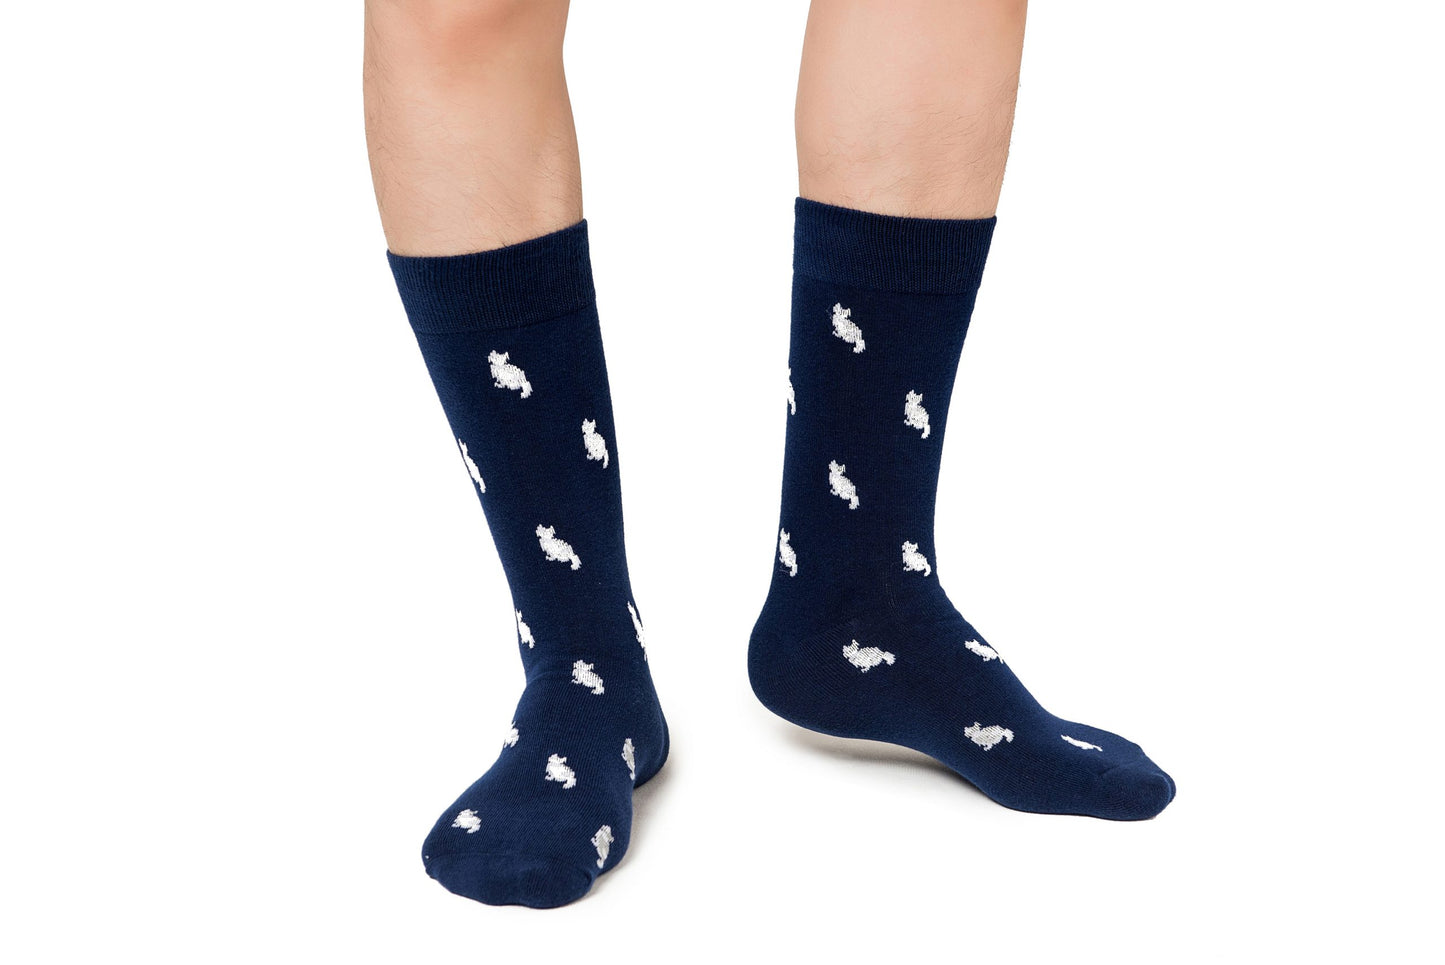 Cat Socks women's socks offer comfortable and stylish designs for any occasion. From cozy ankle socks to knee-highs, our collection of Cat Socks is perfect for adding a touch of sophistication to your everyday.